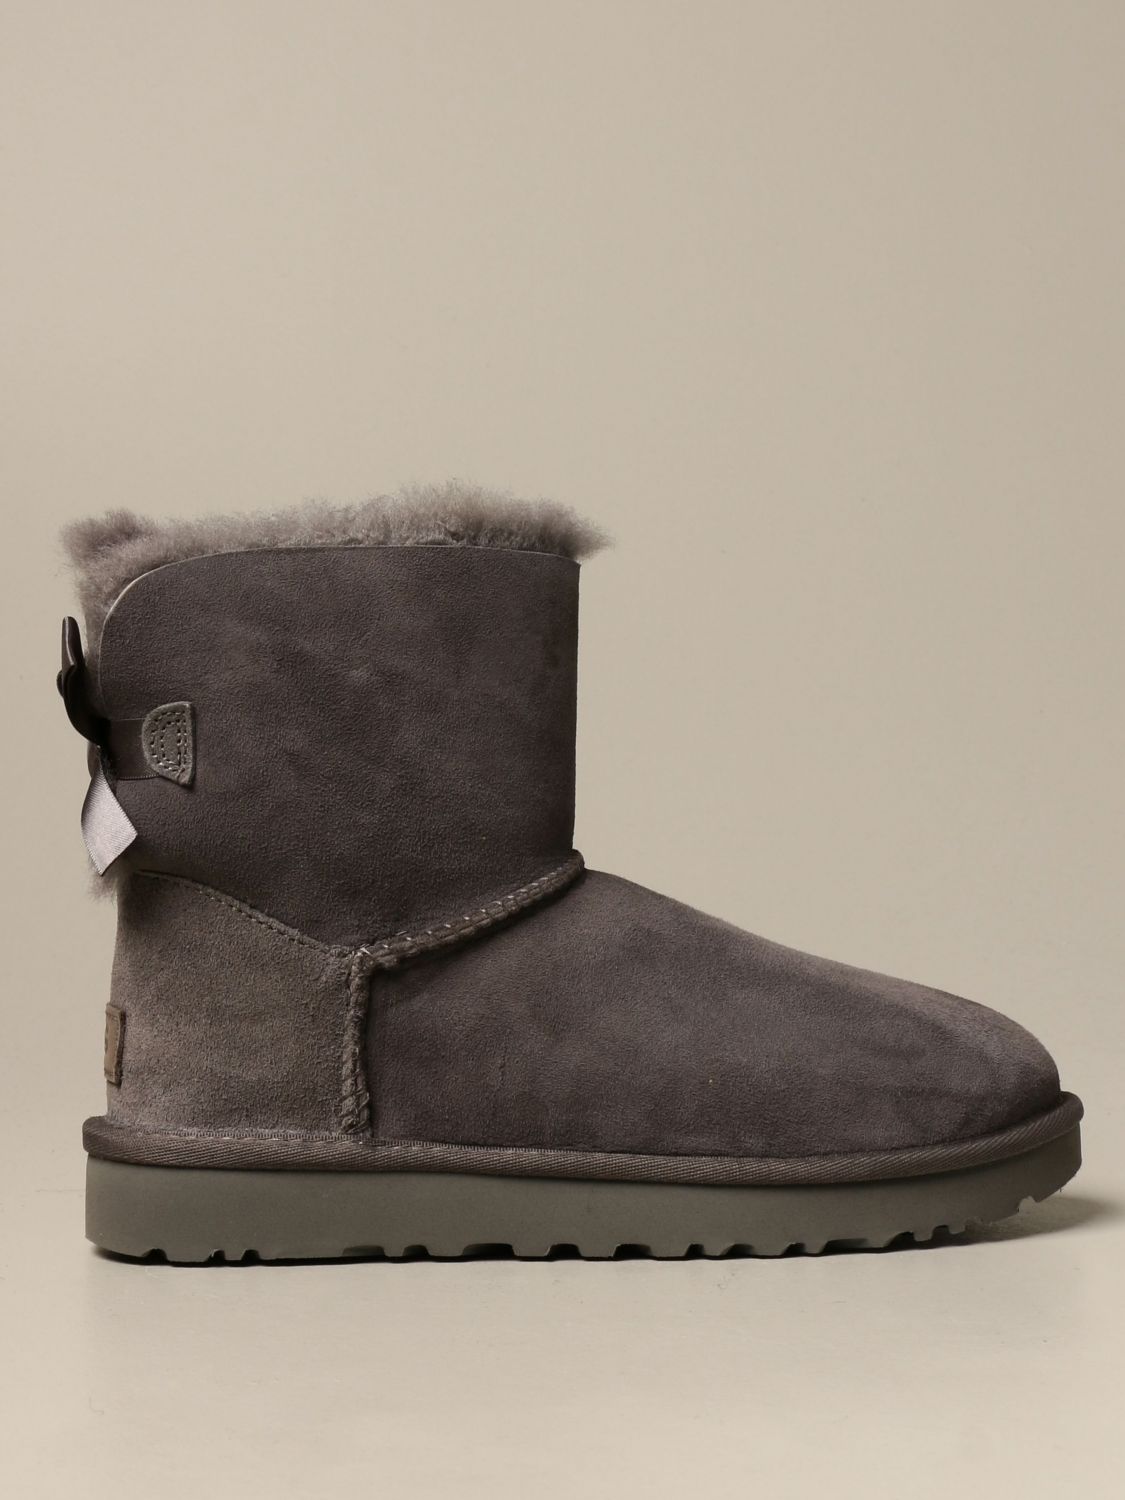 chaussure femme ugg ouverte